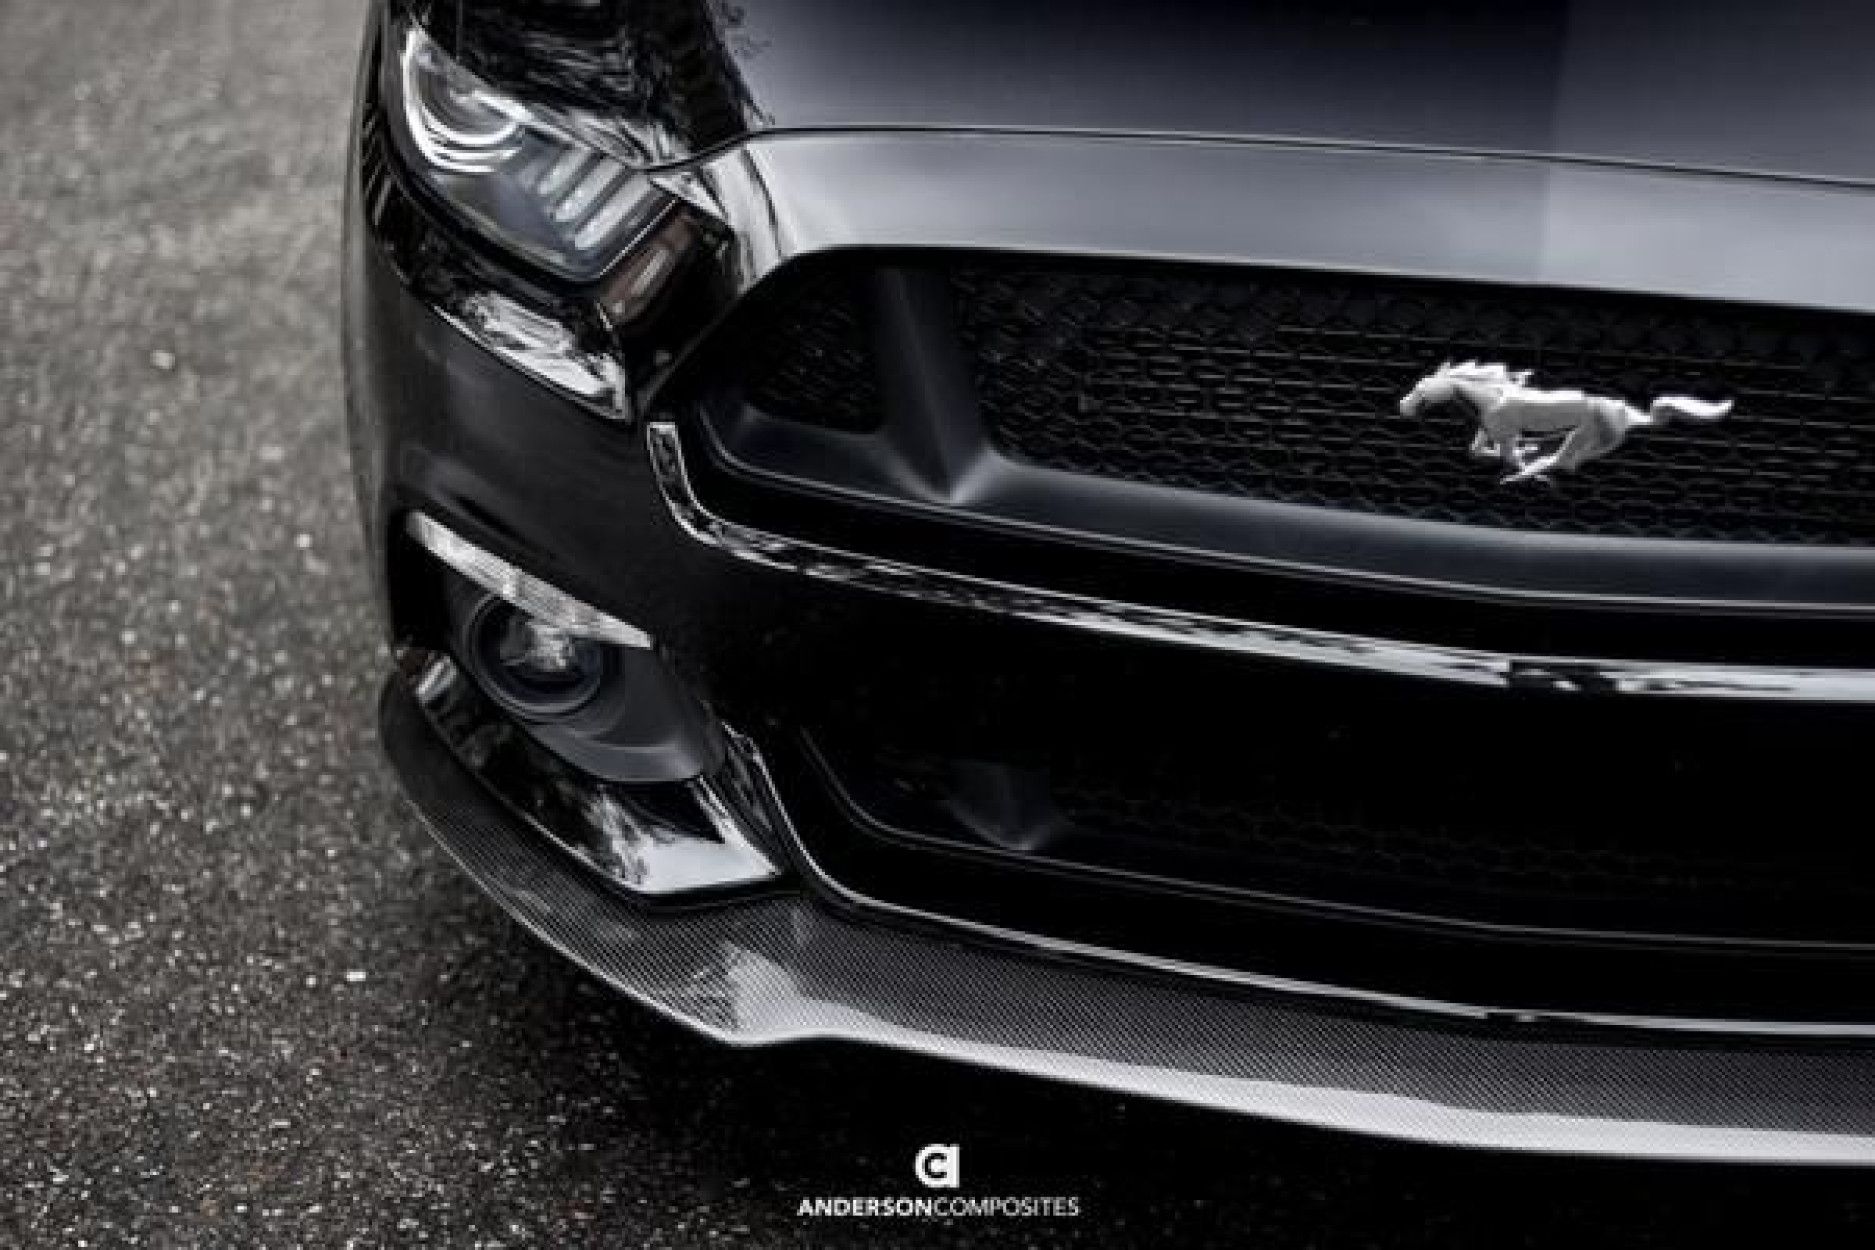 Anderson Composites Type-AC carbon fiber front chin splitter for 2015-2017 Ford Mustang (6) 